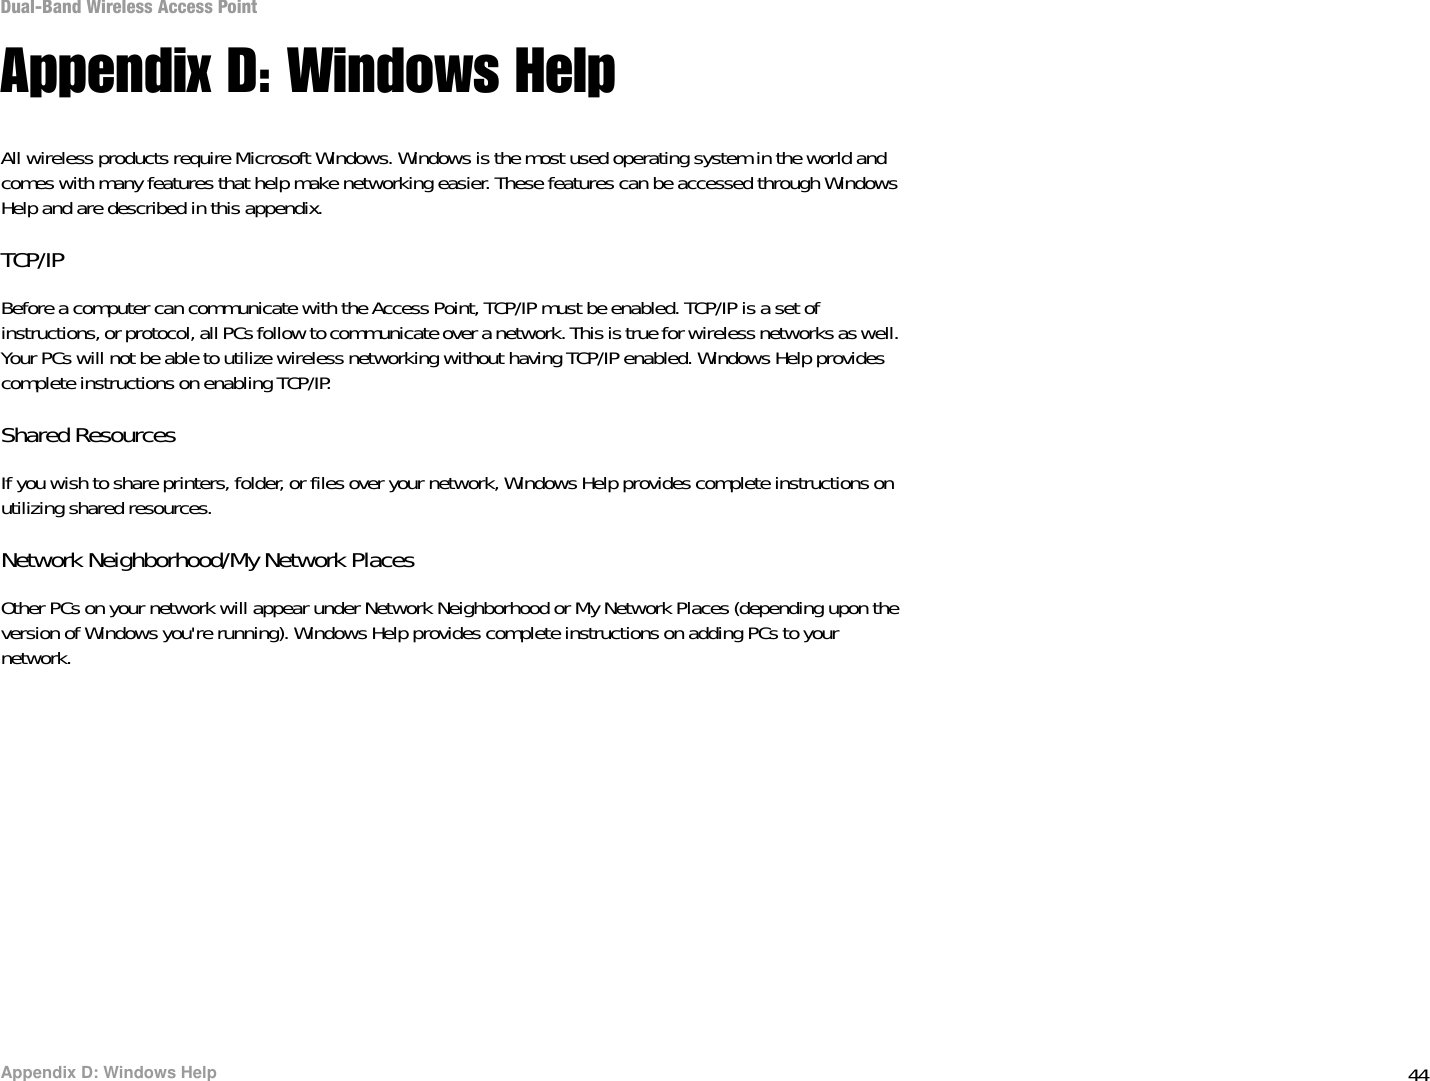 44Appendix D: Windows HelpDual-Band Wireless Access PointAppendix D: Windows HelpAll wireless products require Microsoft Windows. Windows is the most used operating system in the world and comes with many features that help make networking easier. These features can be accessed through Windows Help and are described in this appendix.TCP/IPBefore a computer can communicate with the Access Point, TCP/IP must be enabled. TCP/IP is a set of instructions, or protocol, all PCs follow to communicate over a network. This is true for wireless networks as well. Your PCs will not be able to utilize wireless networking without having TCP/IP enabled. Windows Help provides complete instructions on enabling TCP/IP.Shared ResourcesIf you wish to share printers, folder, or files over your network, Windows Help provides complete instructions on utilizing shared resources.Network Neighborhood/My Network PlacesOther PCs on your network will appear under Network Neighborhood or My Network Places (depending upon the version of Windows you&apos;re running). Windows Help provides complete instructions on adding PCs to your network.